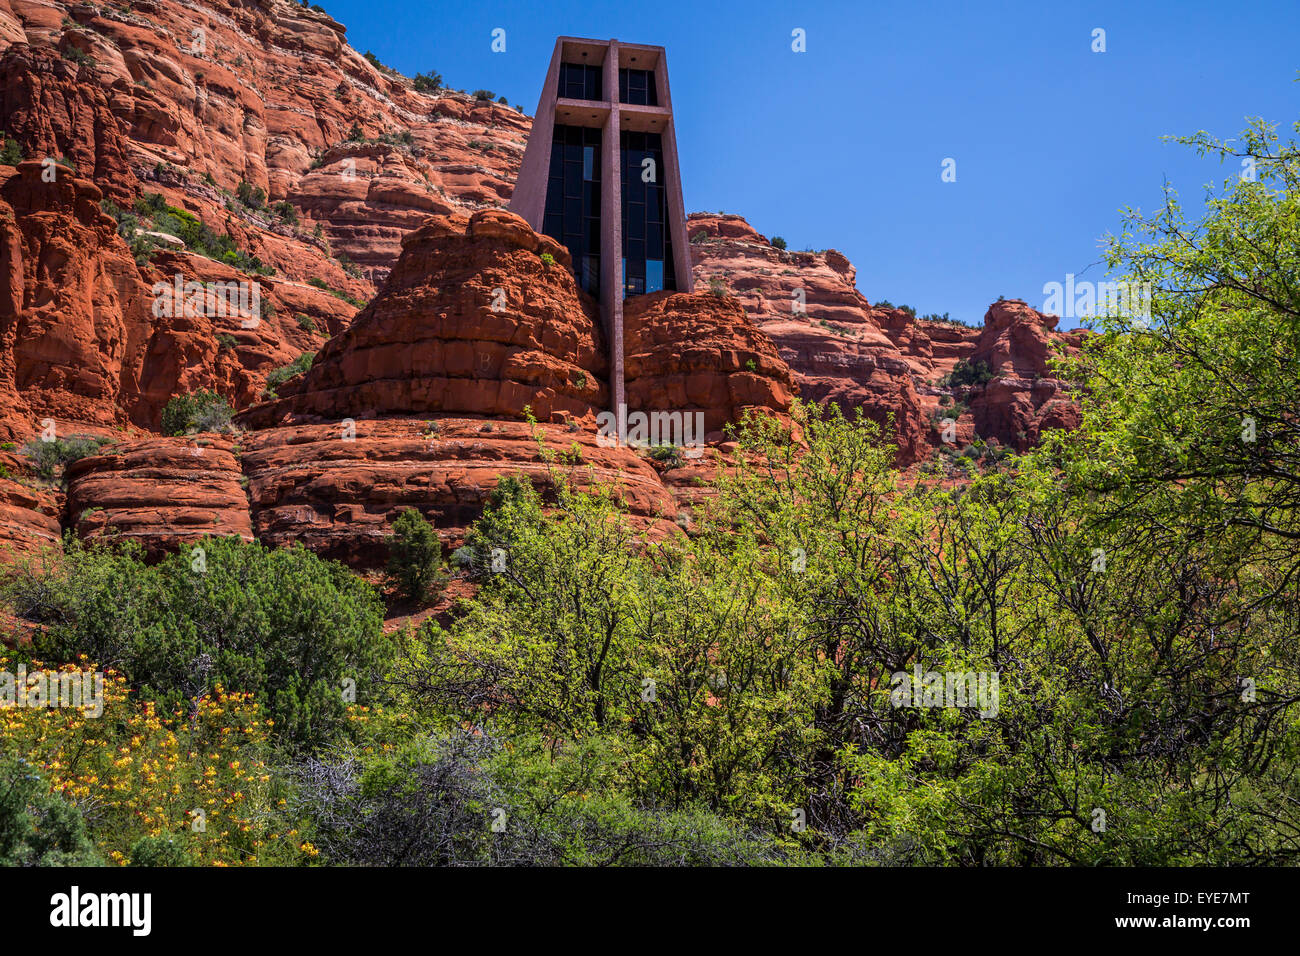 The Chapel of the Holy Cross in the red buttes of Sedona, Arizona, USA. Stock Photo